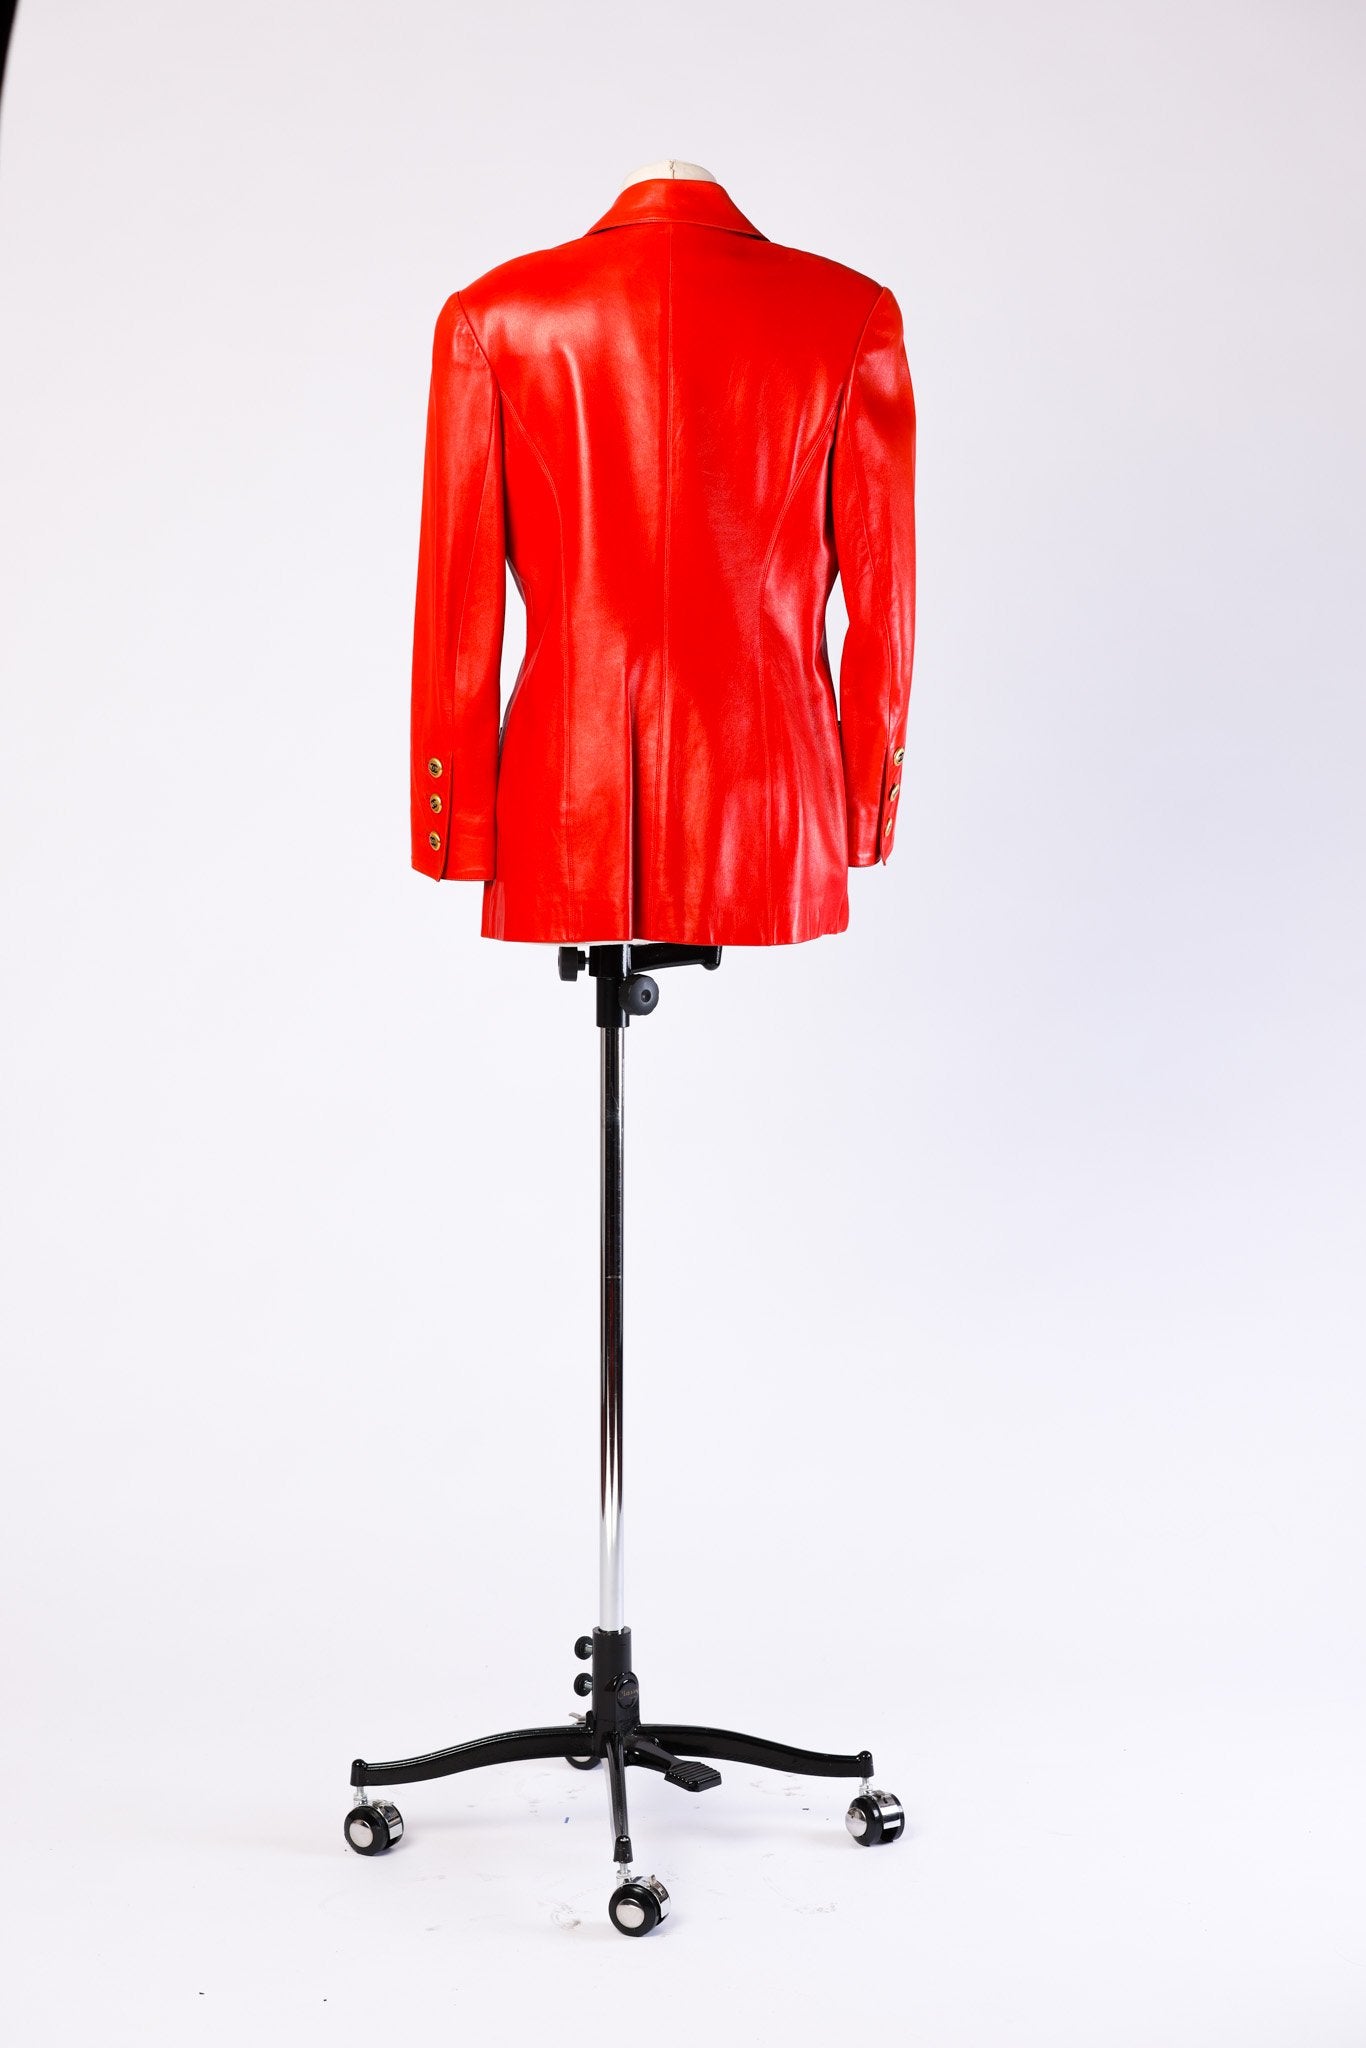 CHANEL | Vintage Red Leather Blazer and Skirt Set